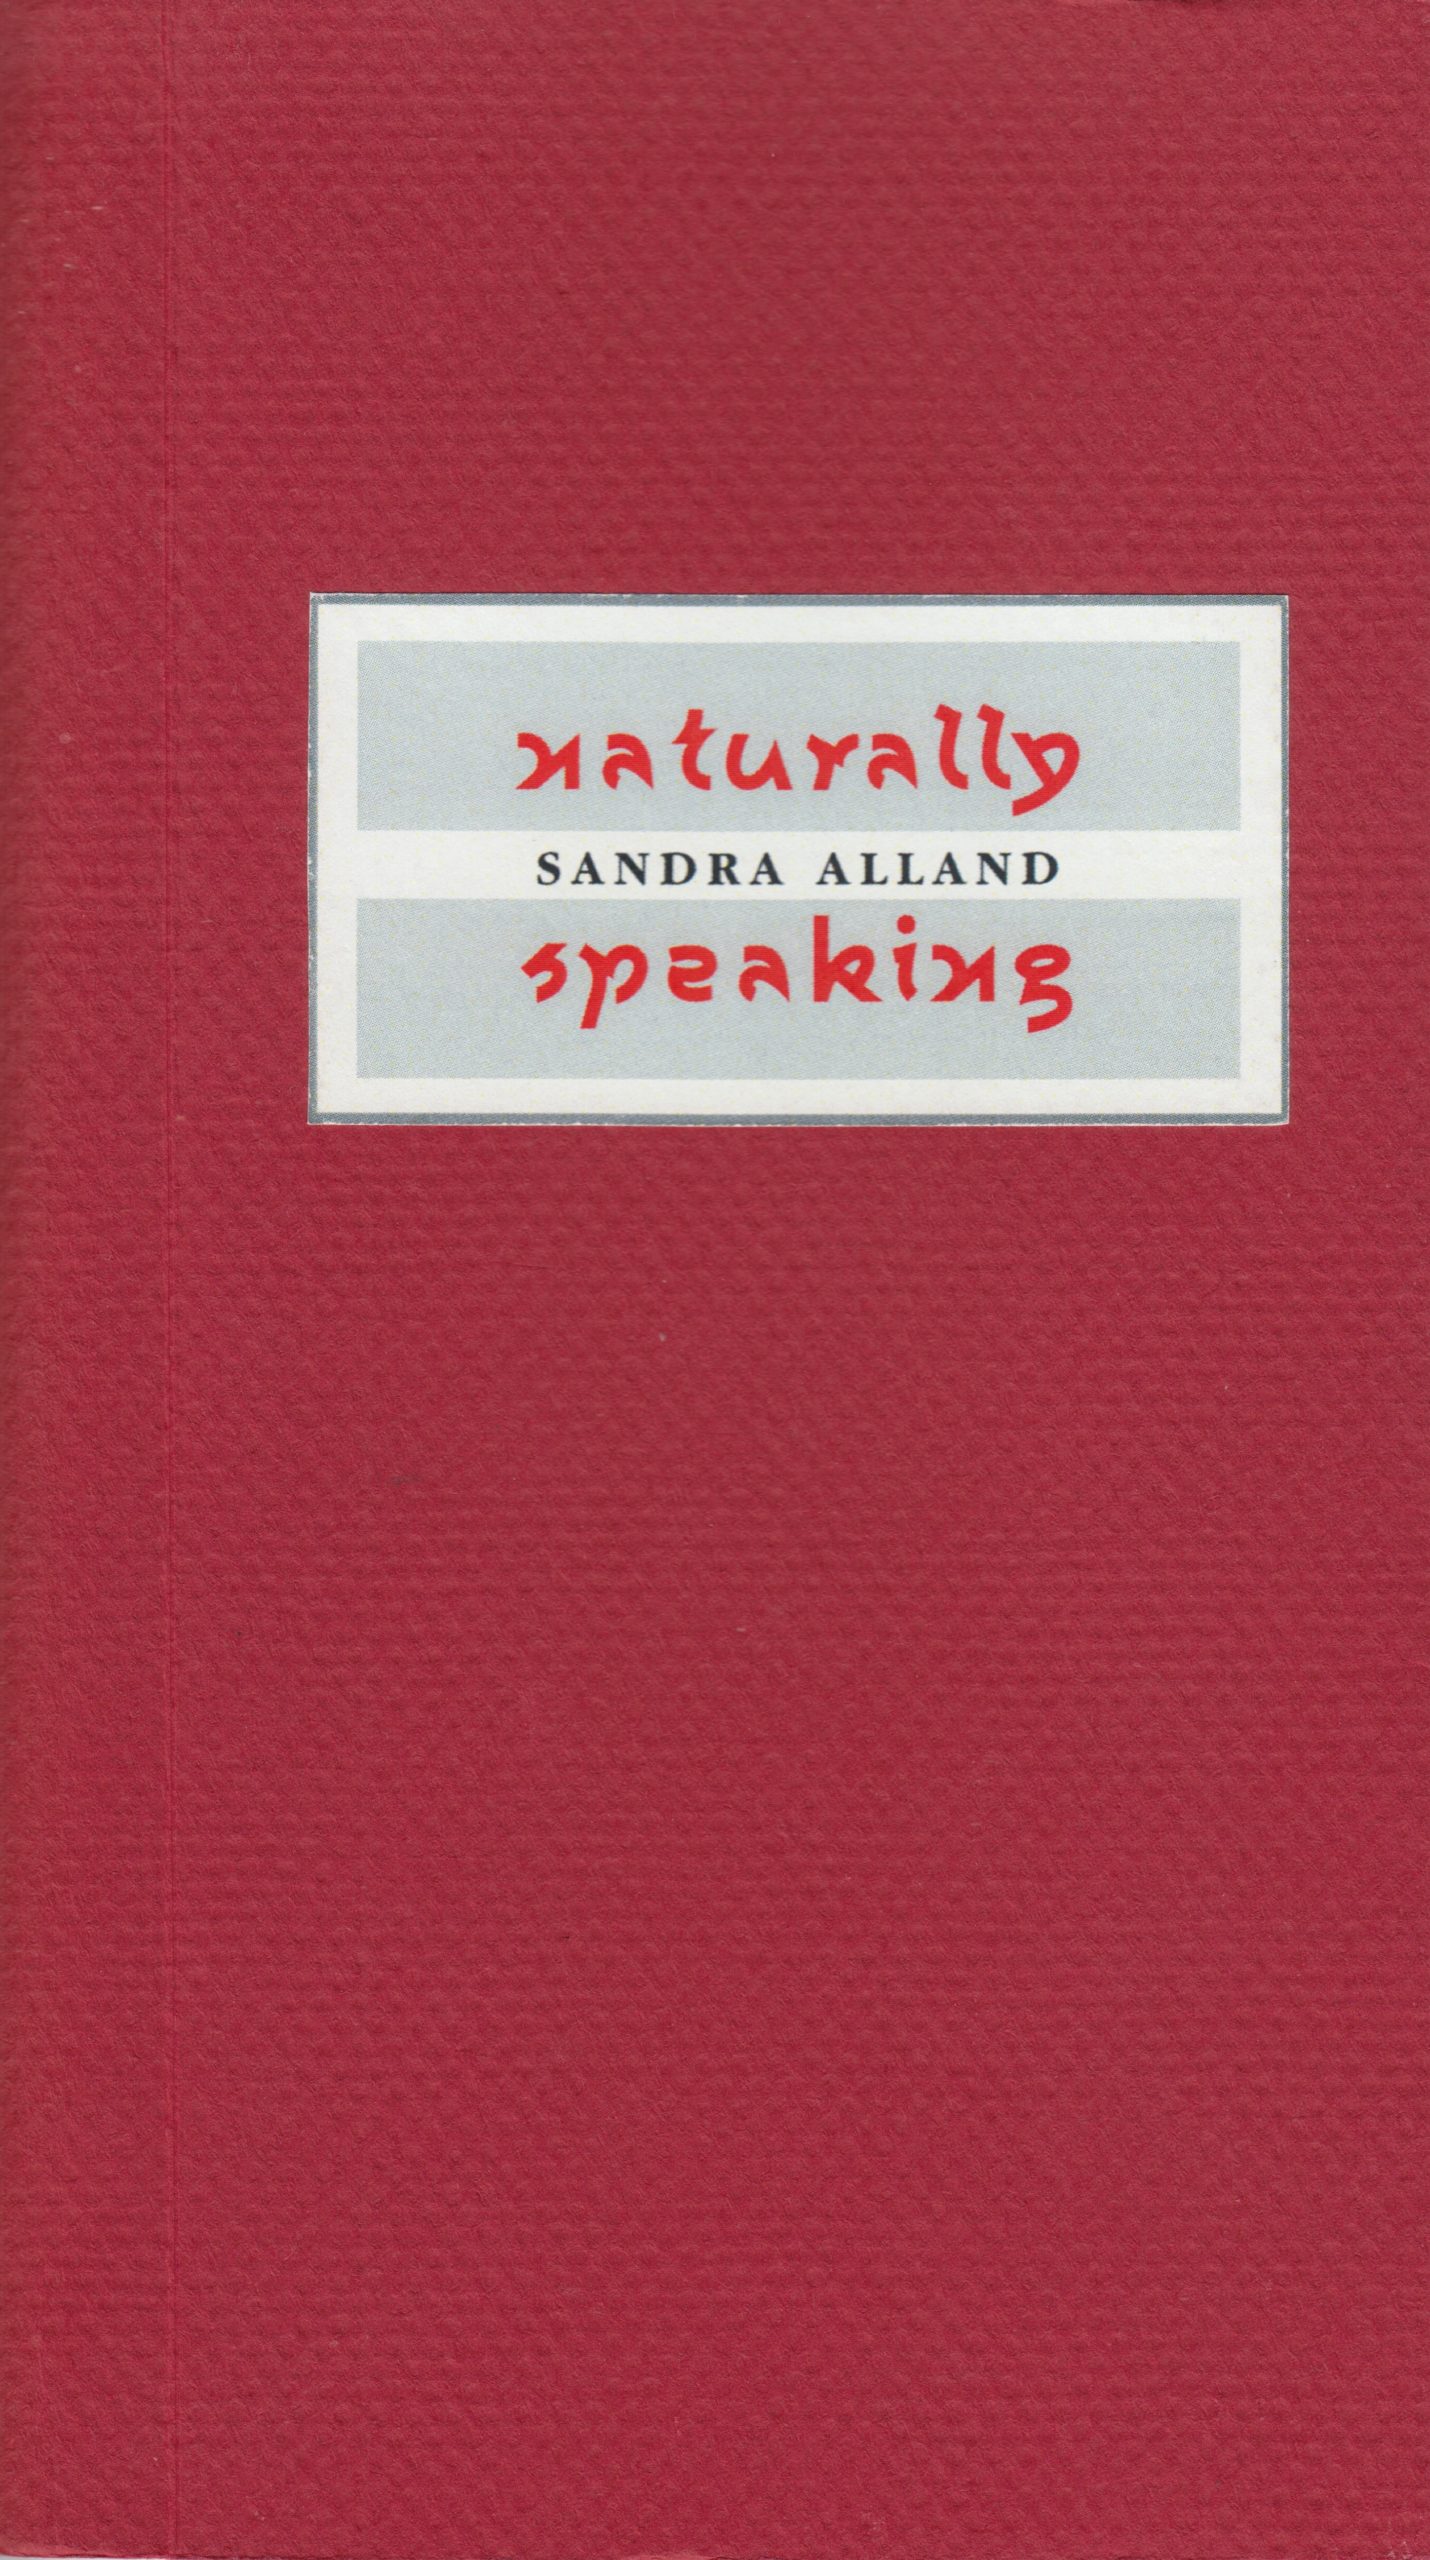 The cover of Naturally Speaking by Sandra Alland. The cover is red, with the title and author name encased in a white-gray frame. The book’s title is in a playful, almost hand-written font, whereas the author’s name is in a standard font. The red paper has a subtle raised checked pattern that invites touch.